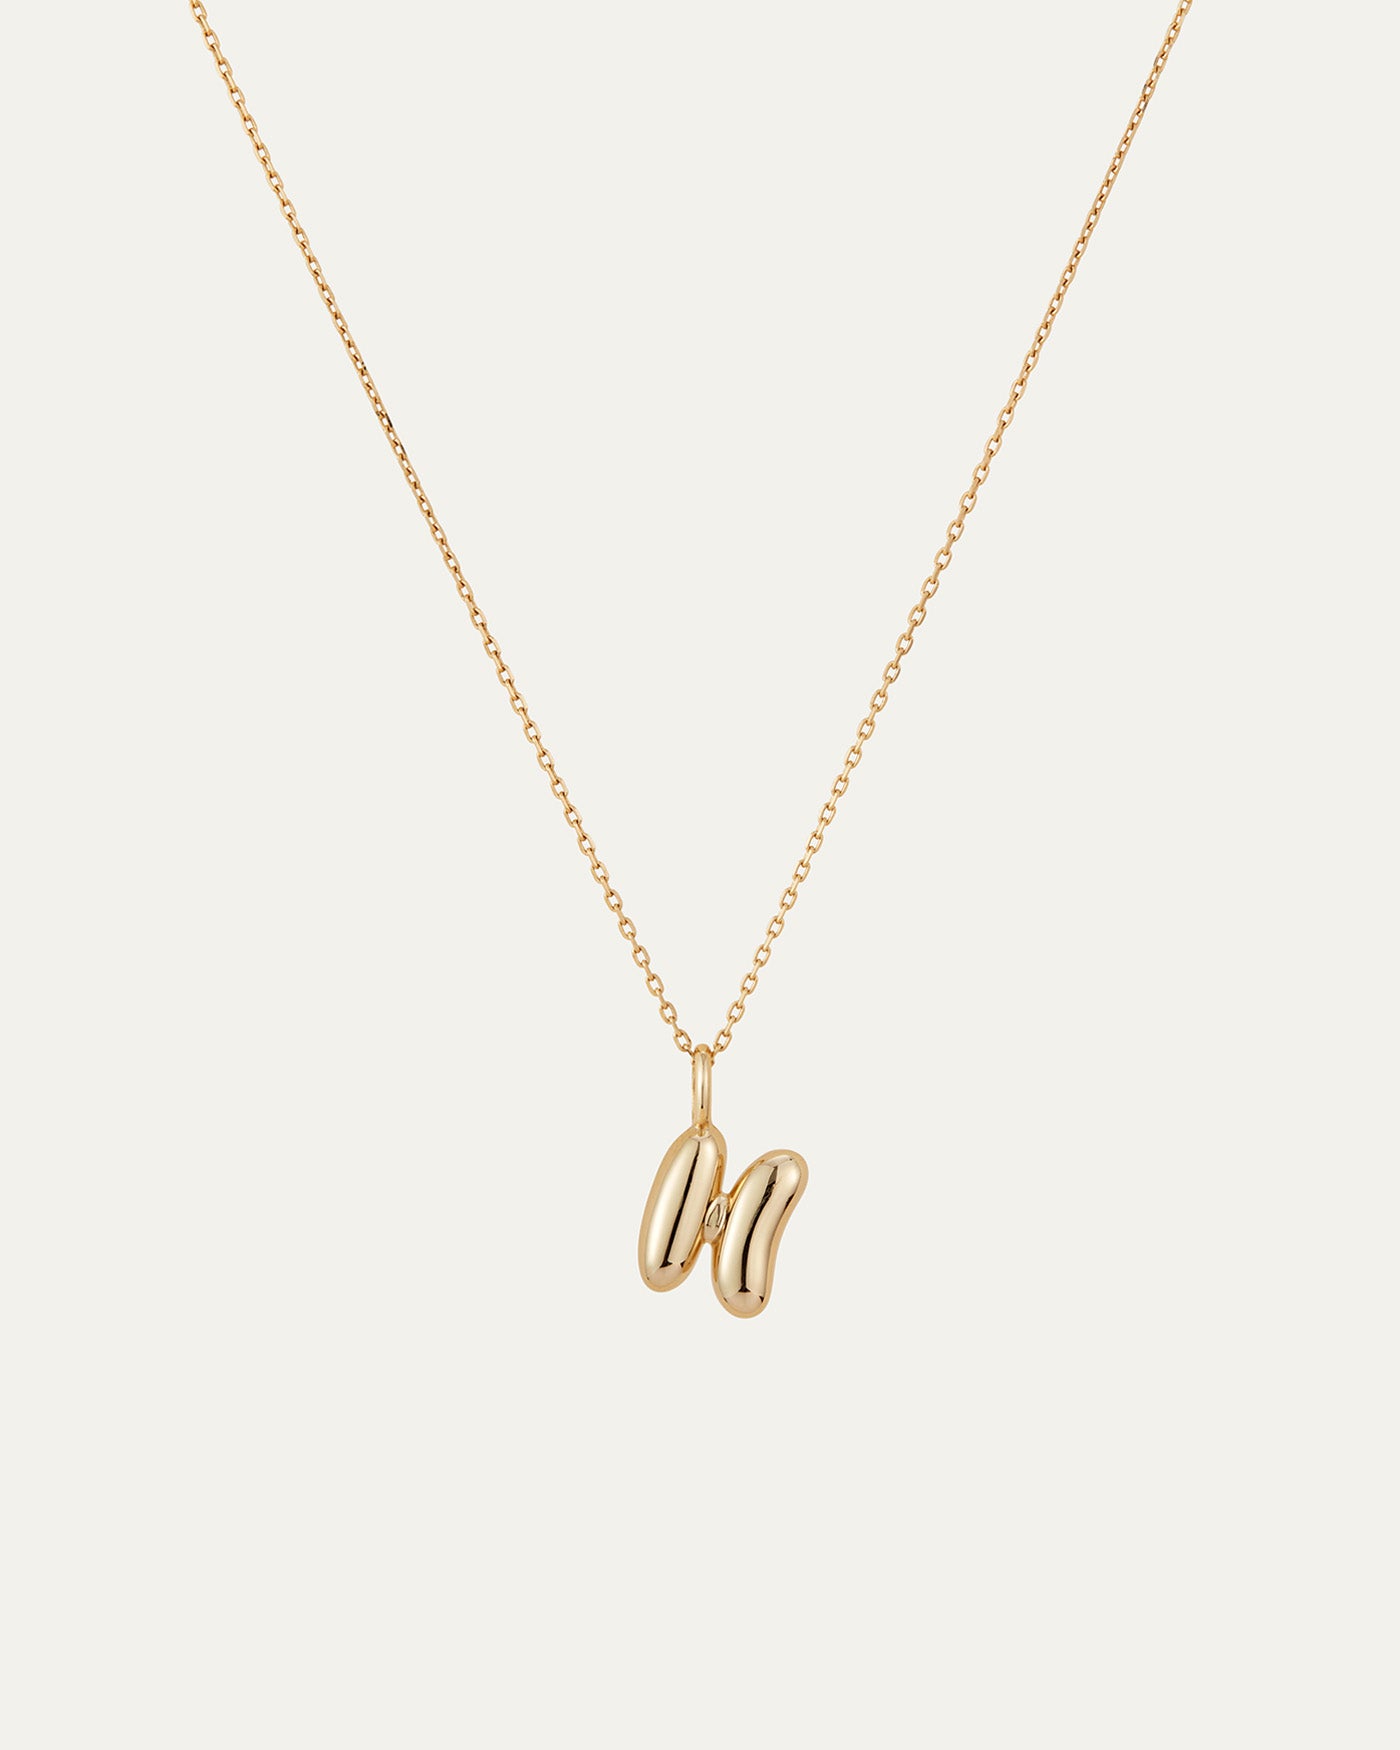 Necklace Shortener for Thin Chain 14K Gold and Silver Necklace